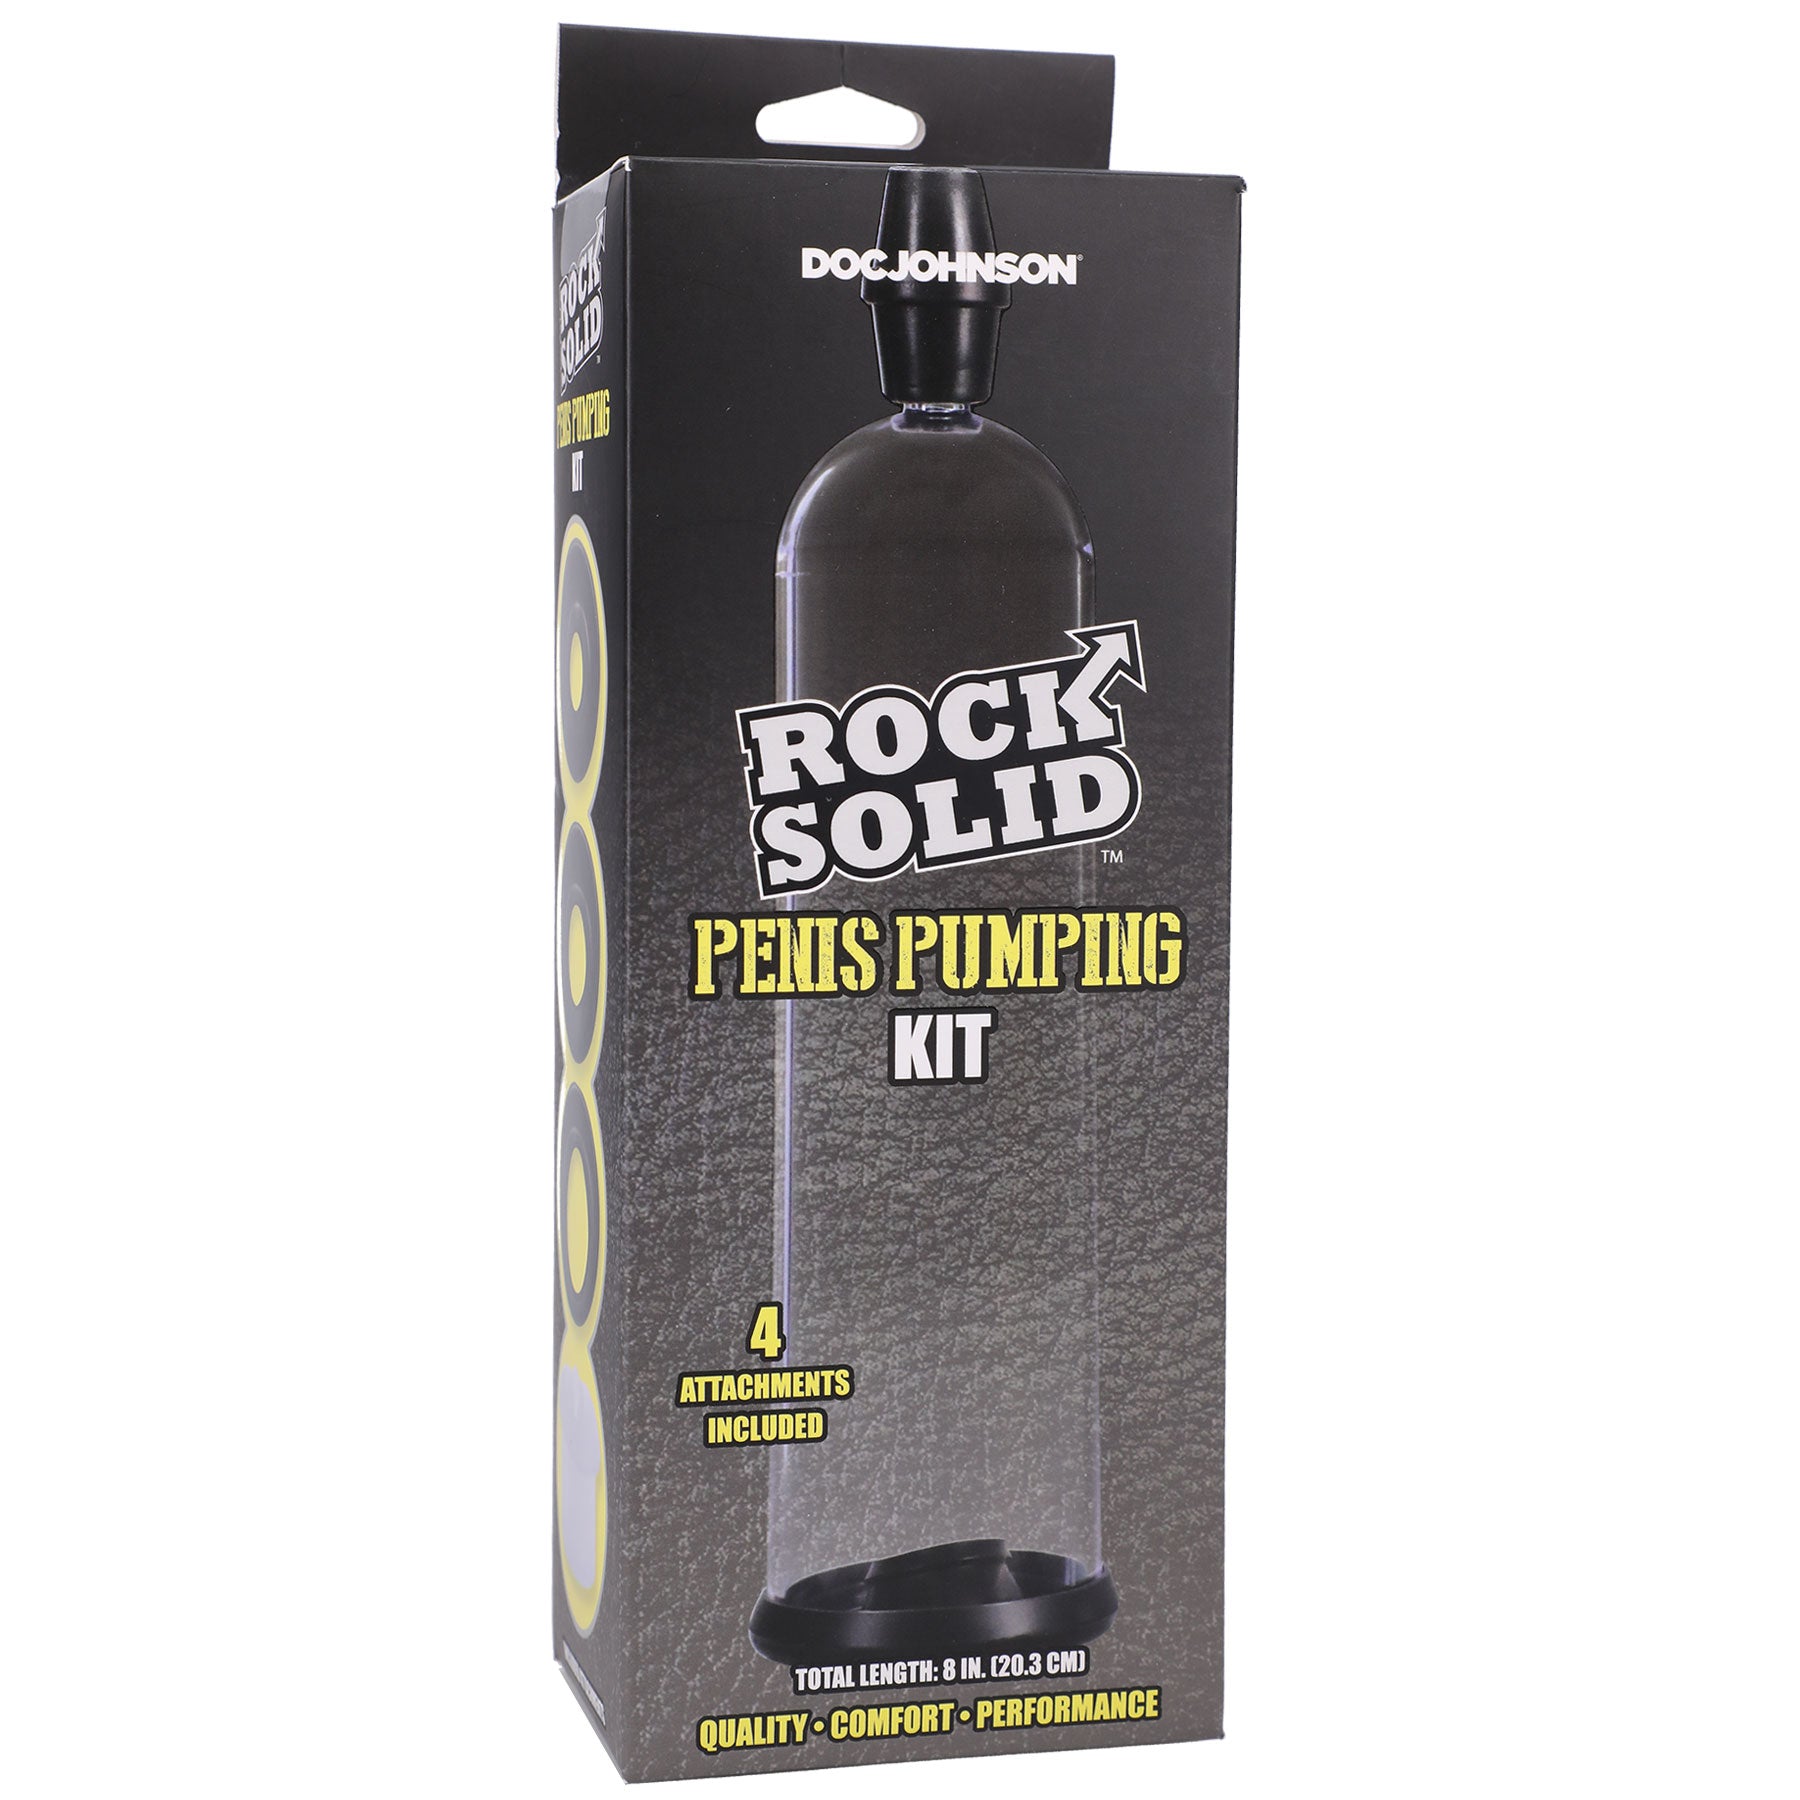 Rock Solid - Penis Pumping Kit - Black/clear-5